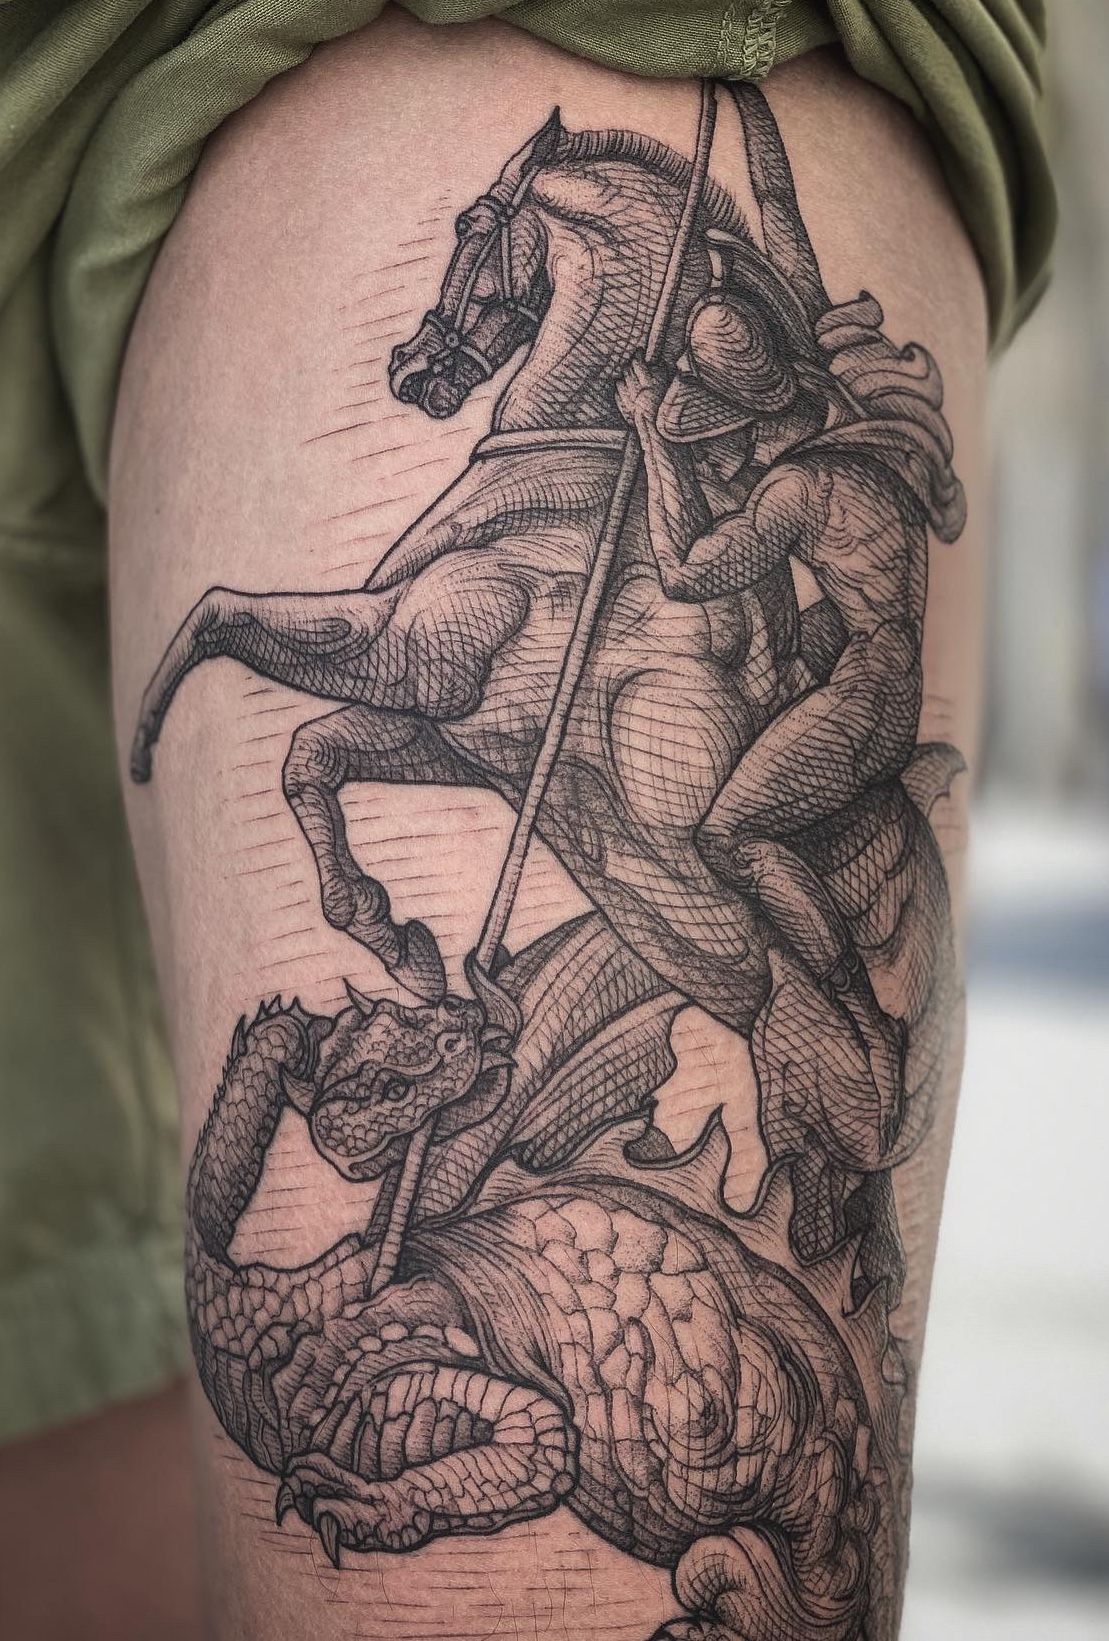 SaintGeorge tattoo meanings  popular questions